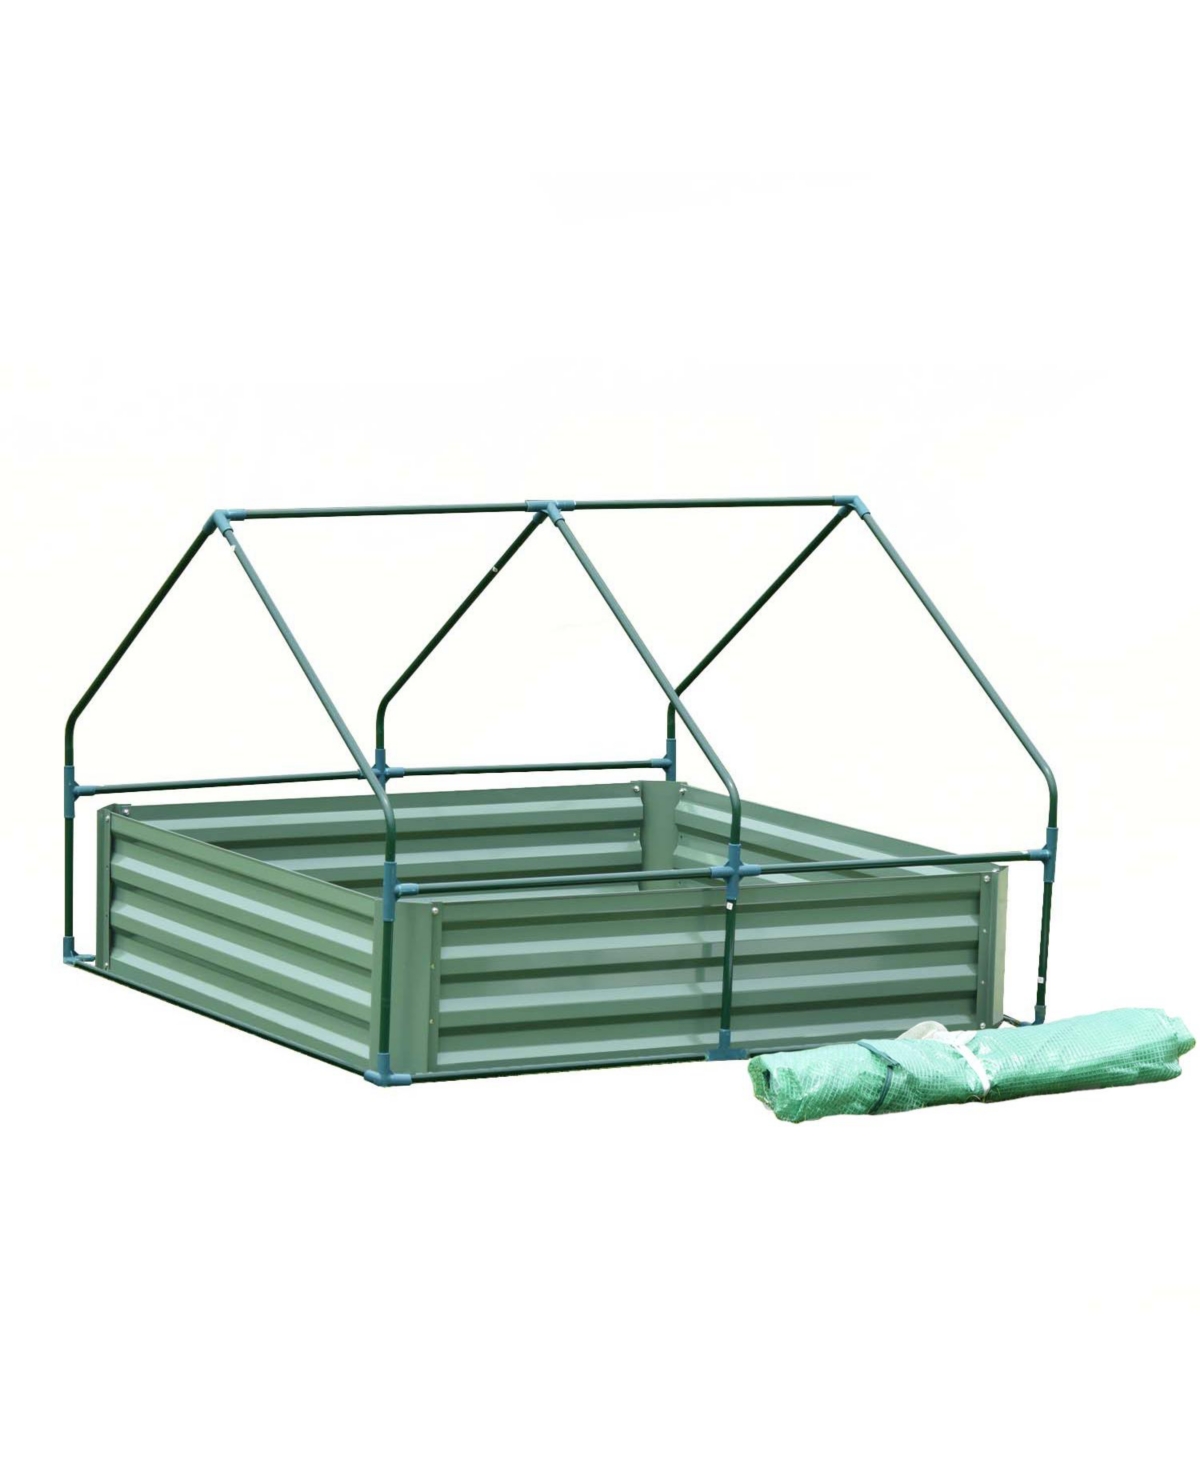 47.2''x47.2''x35.4'' ft Raised Garden Bed Planter Box with Customized Greenhouse Water Resistant Uv Protected. - Green